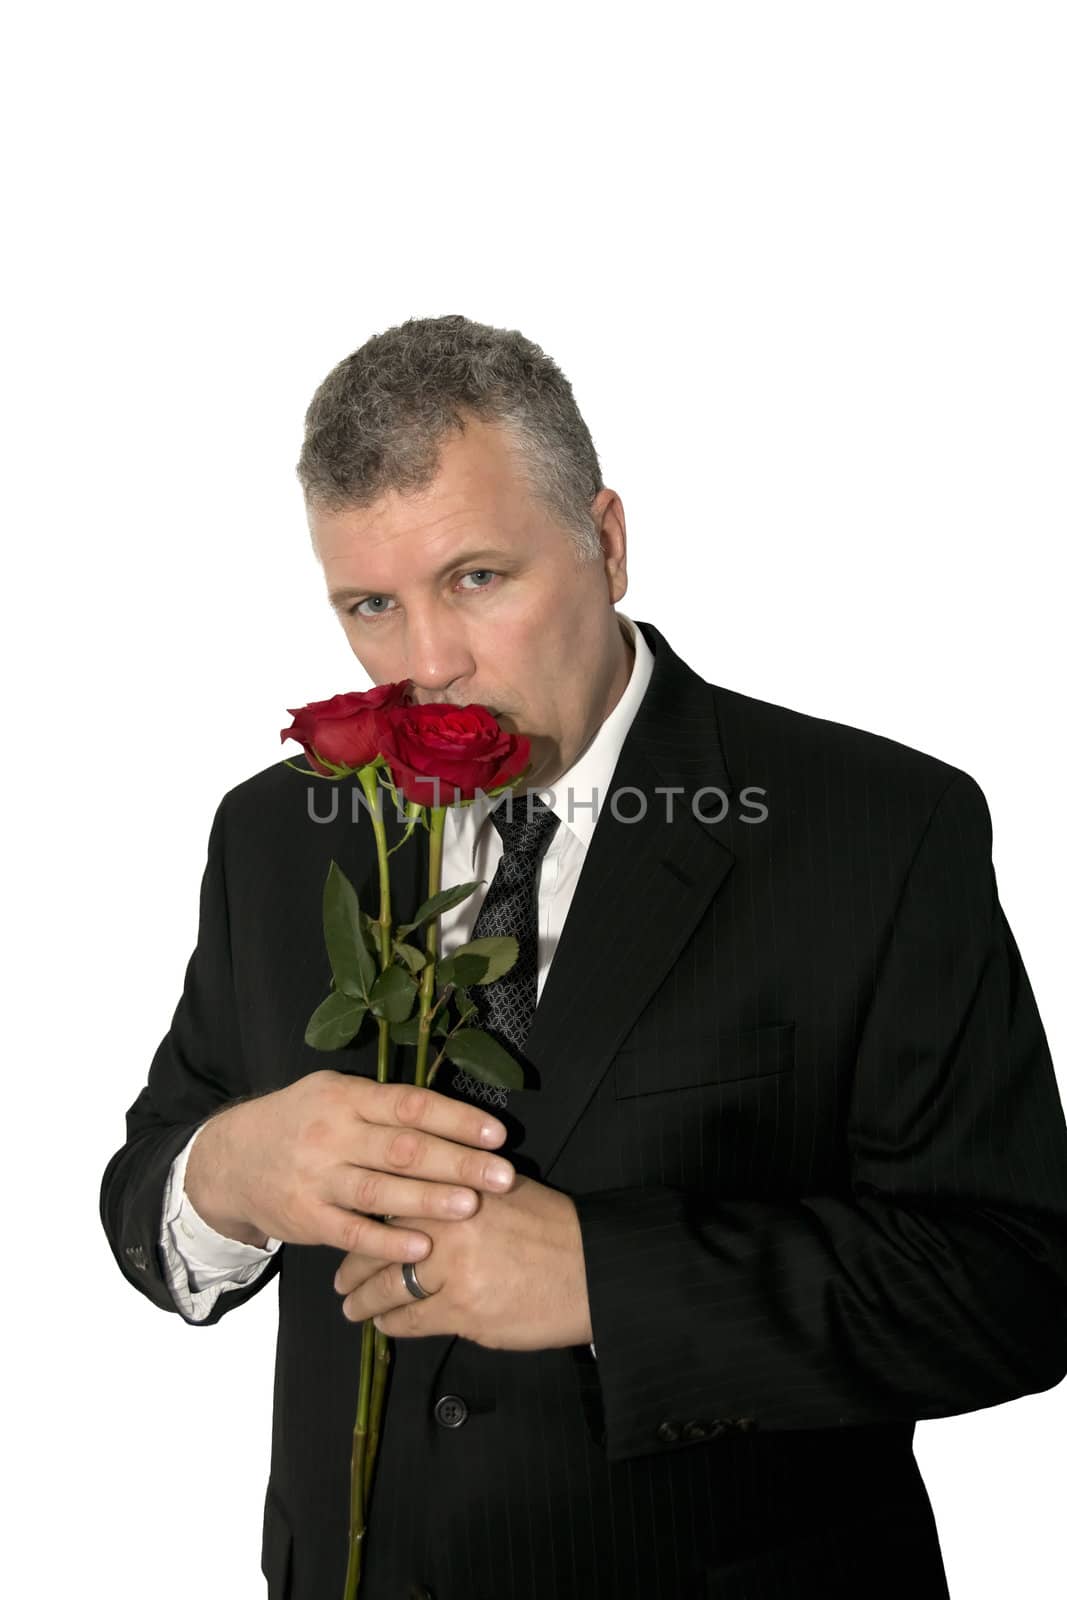 Handsome Man with Roses by wayneandrose